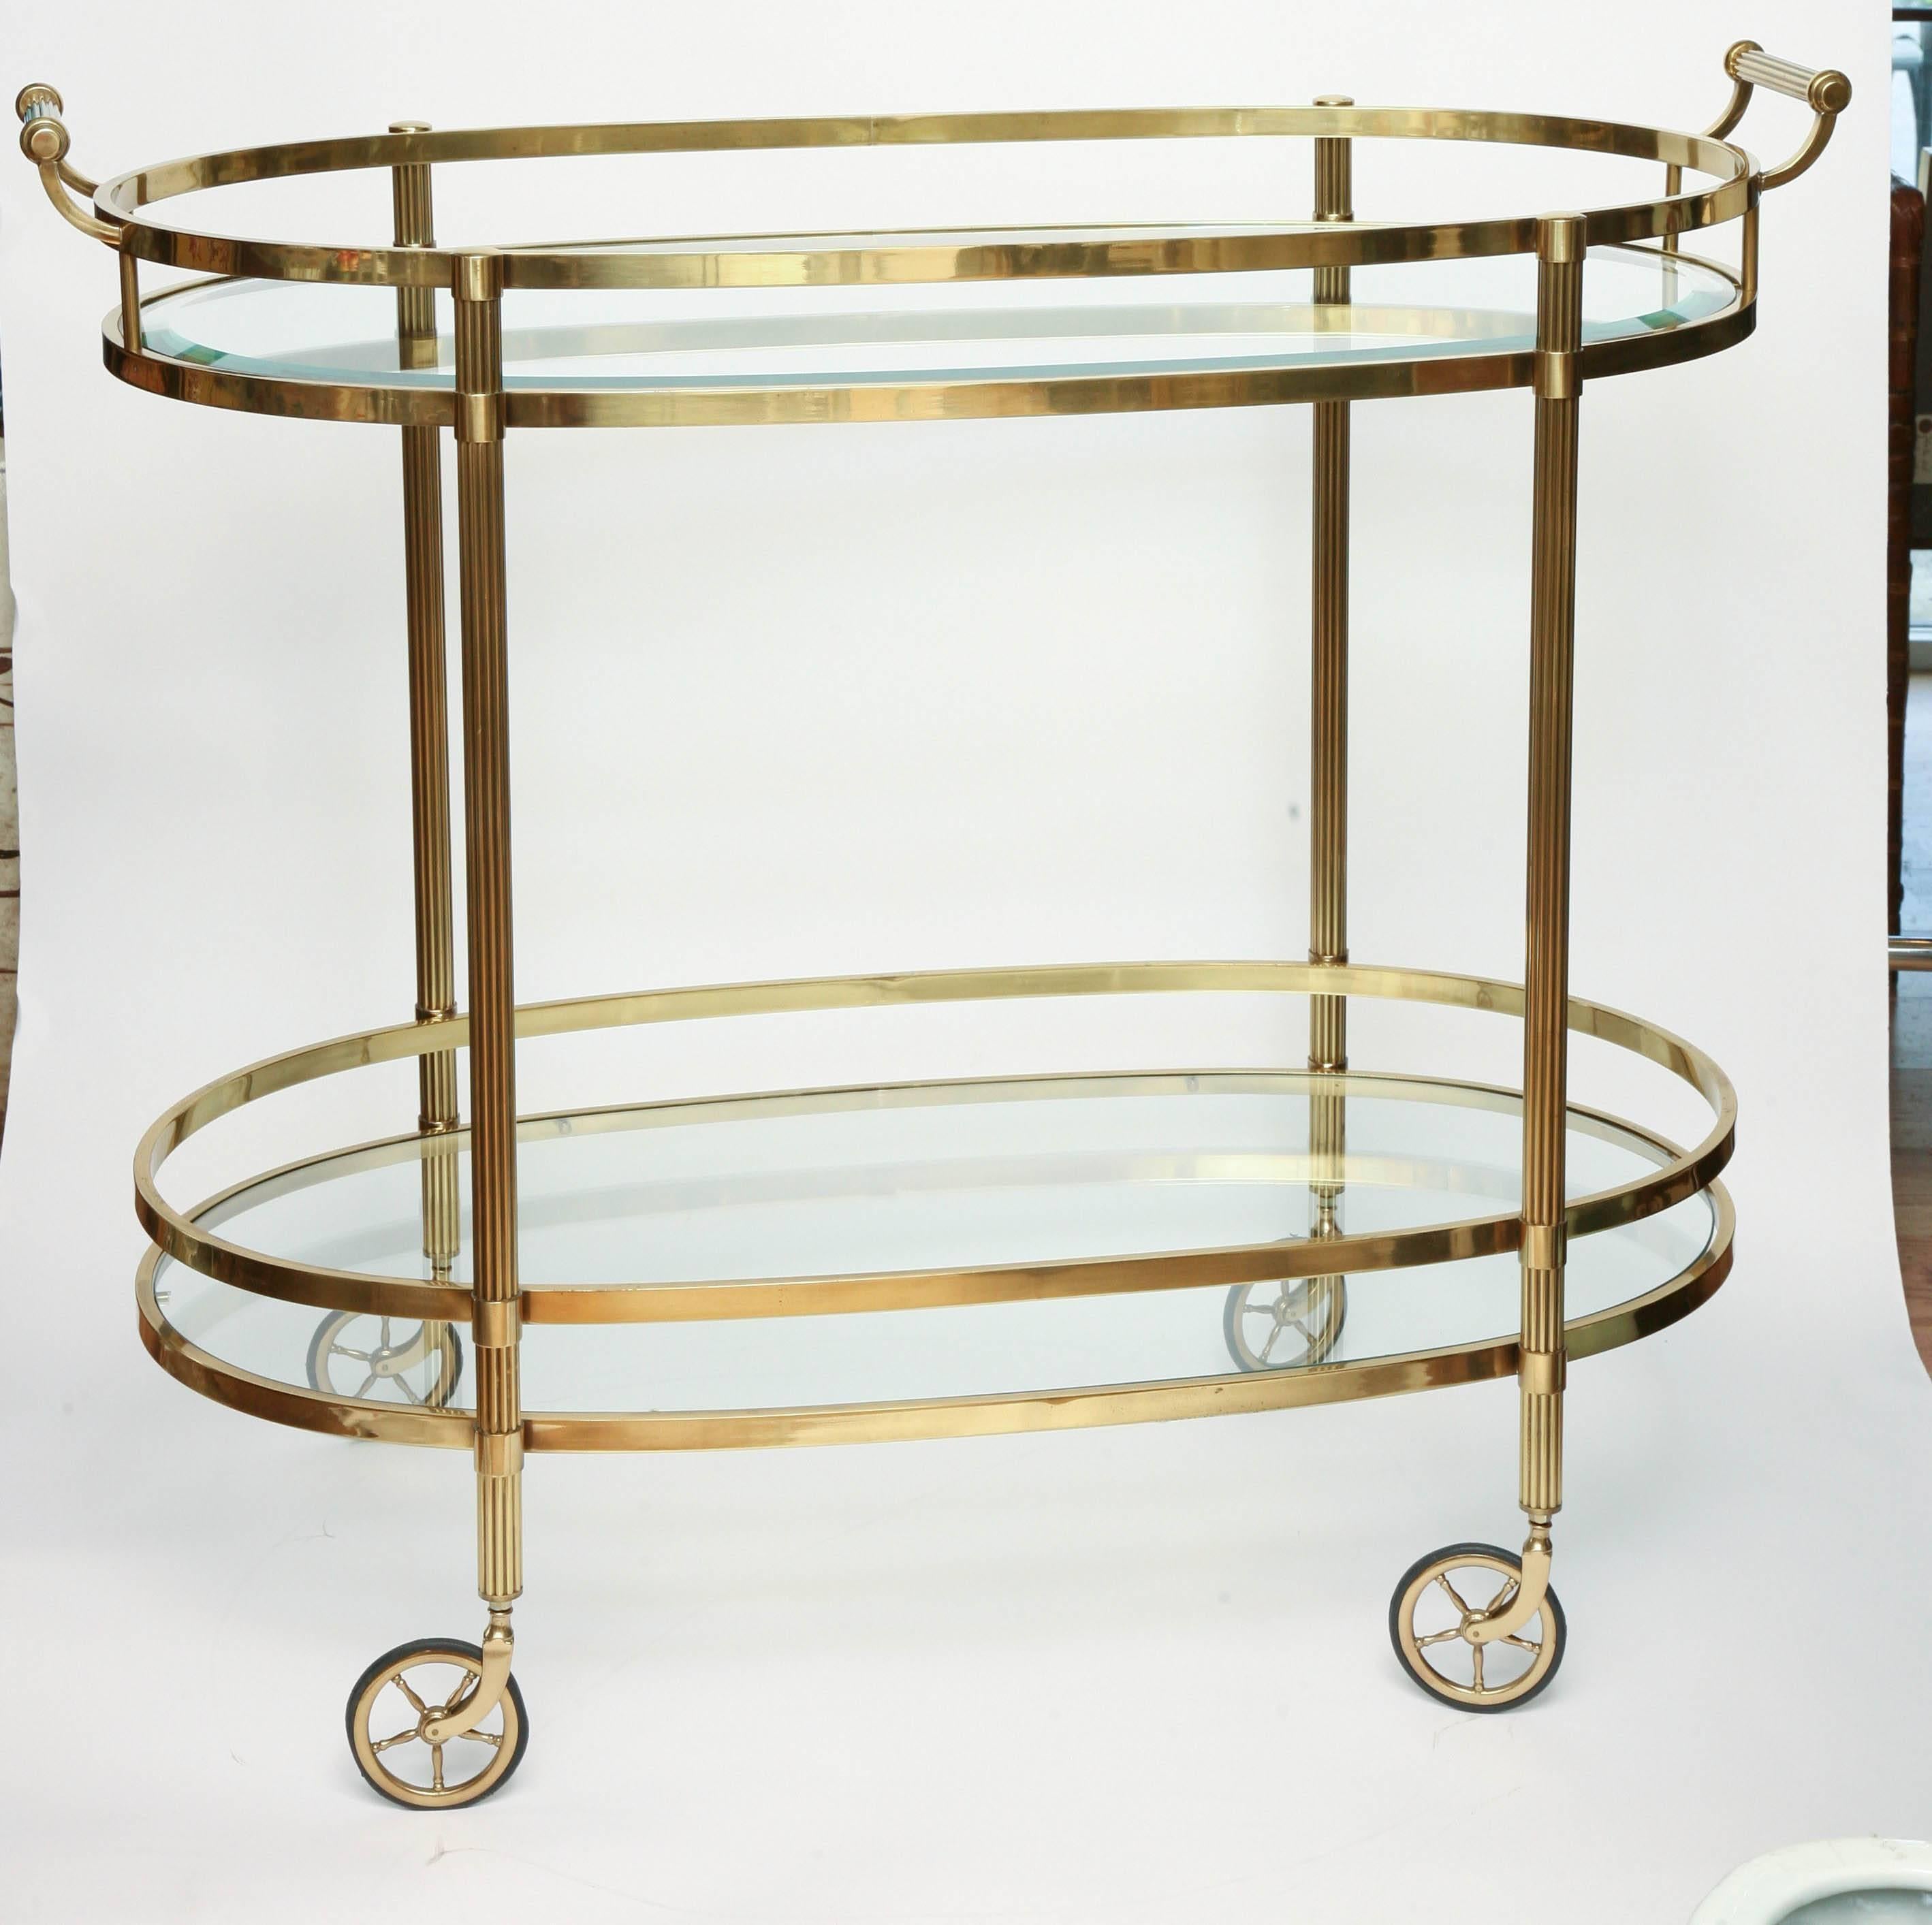 Exceptional two-tiered brass bar cart with glass shelves.